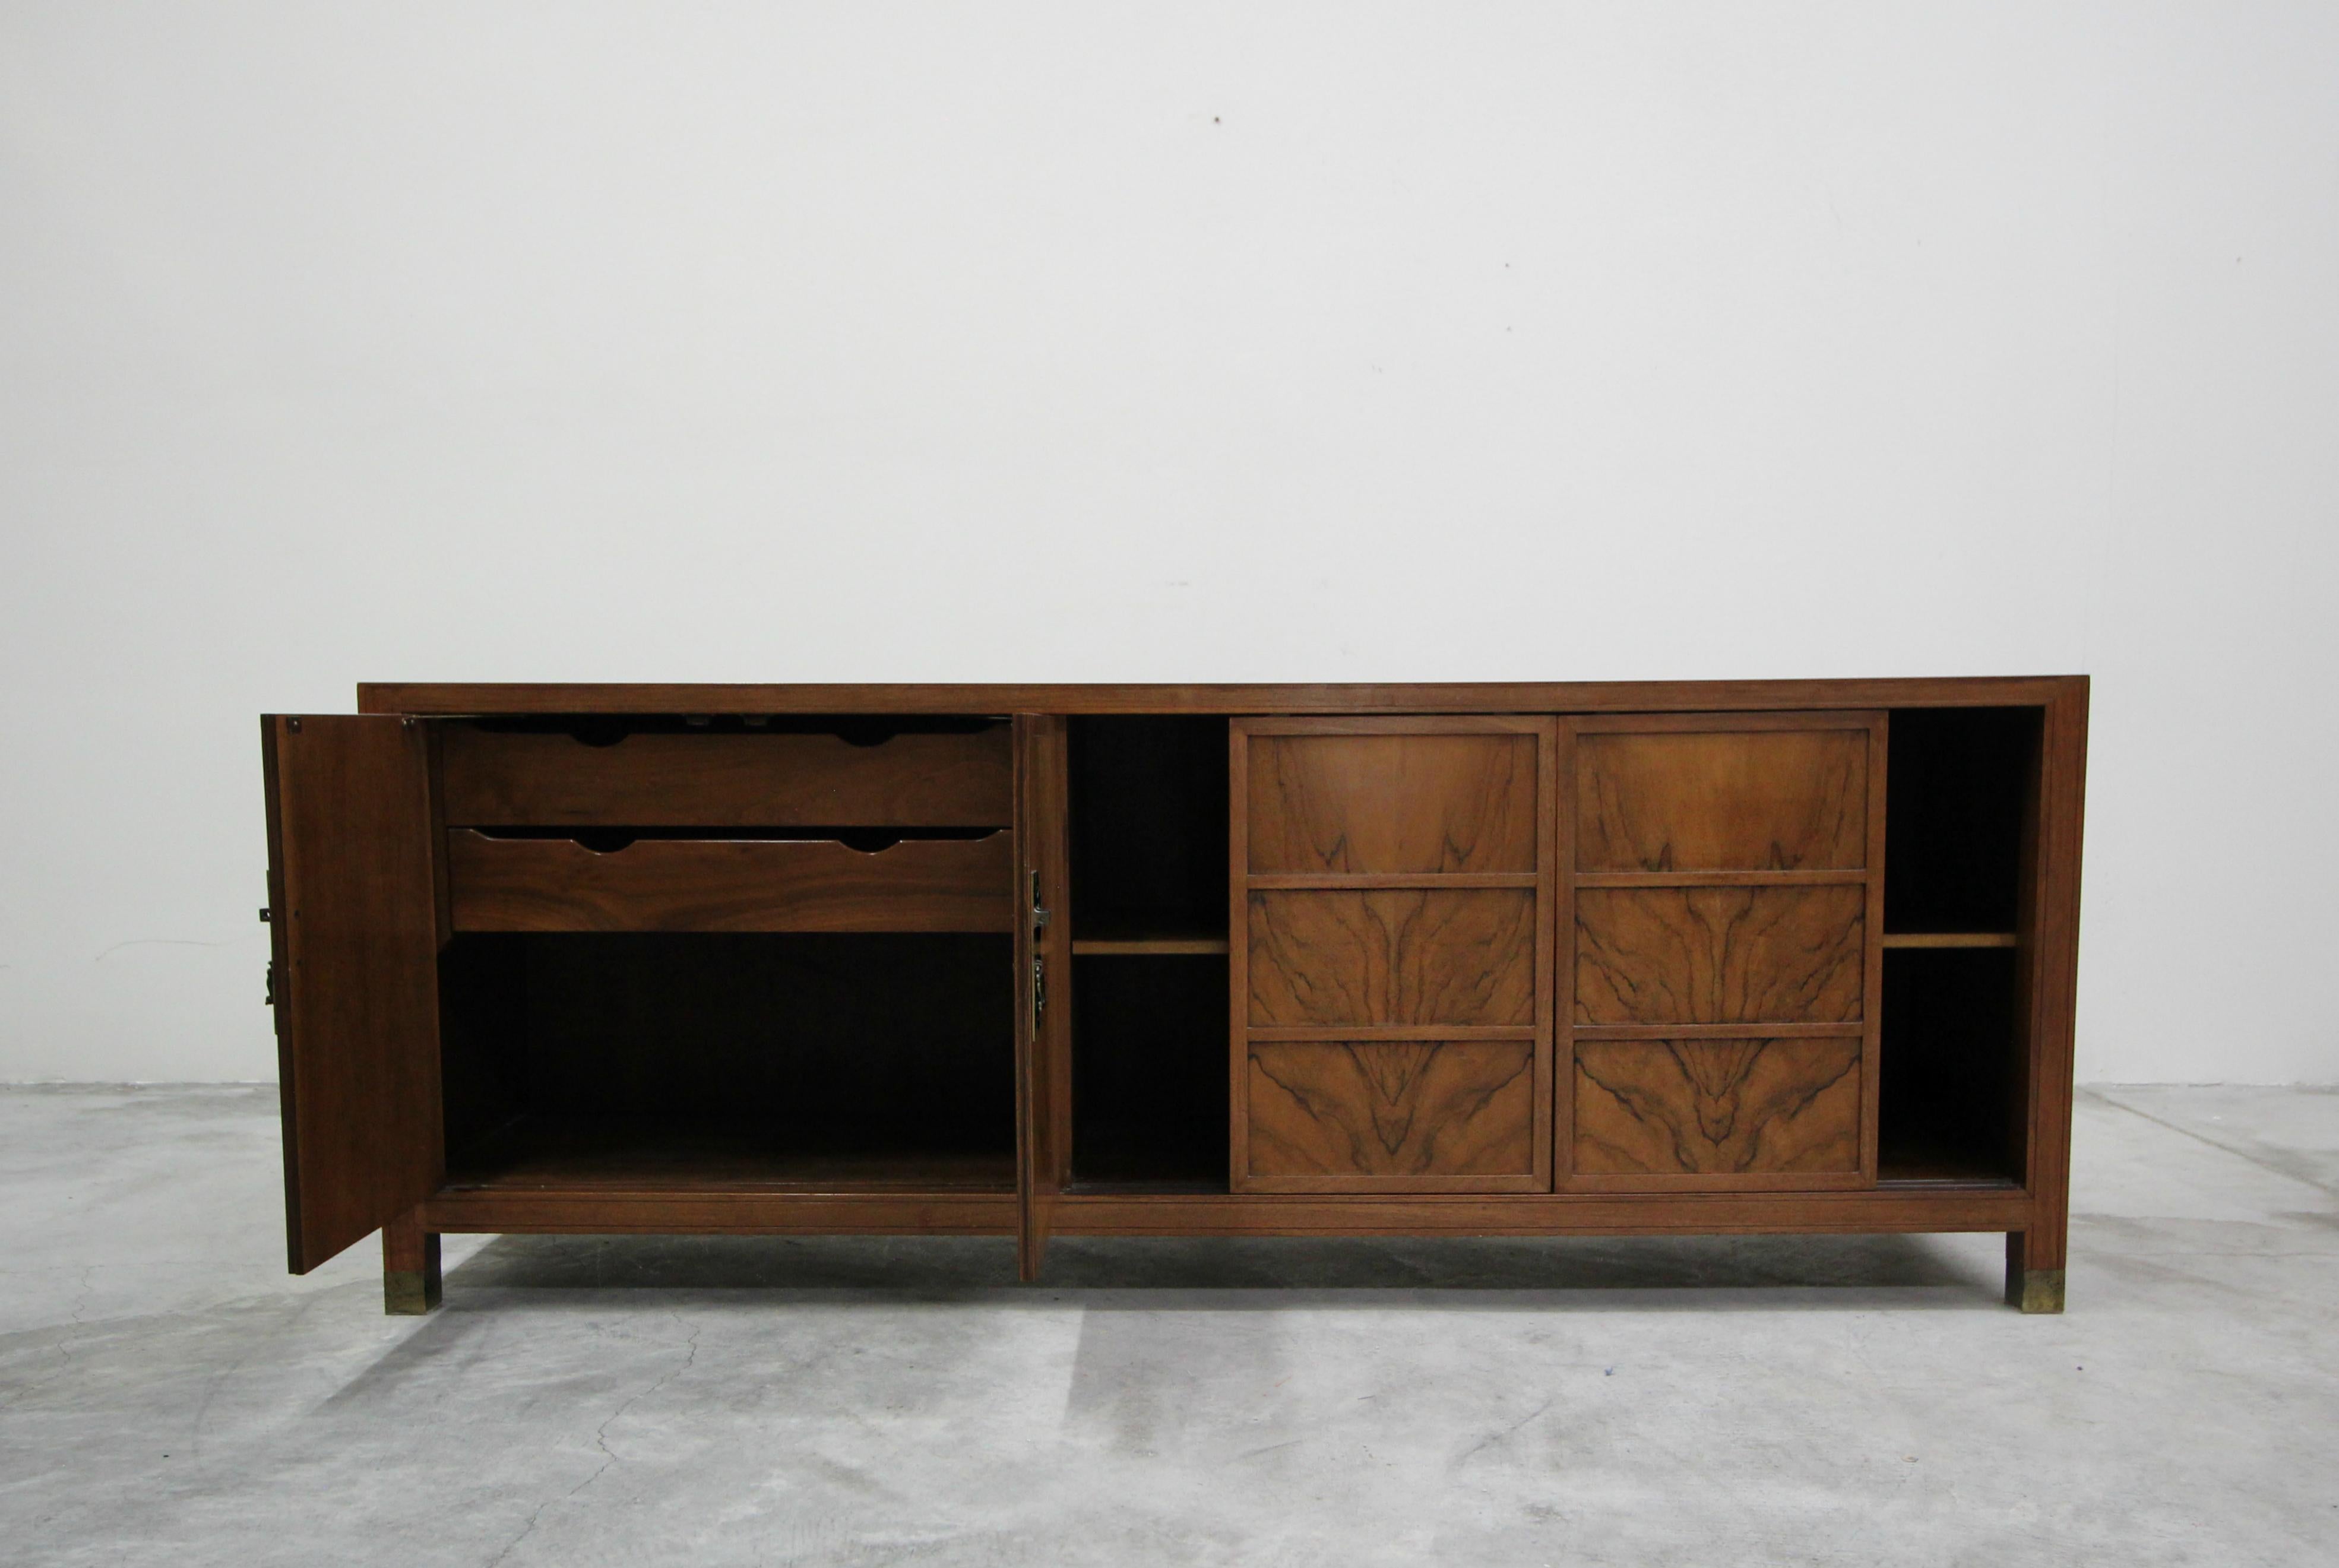 Midcentury Walnut Credenza by Frank Van Steenberg for Baker Far East Collection 1